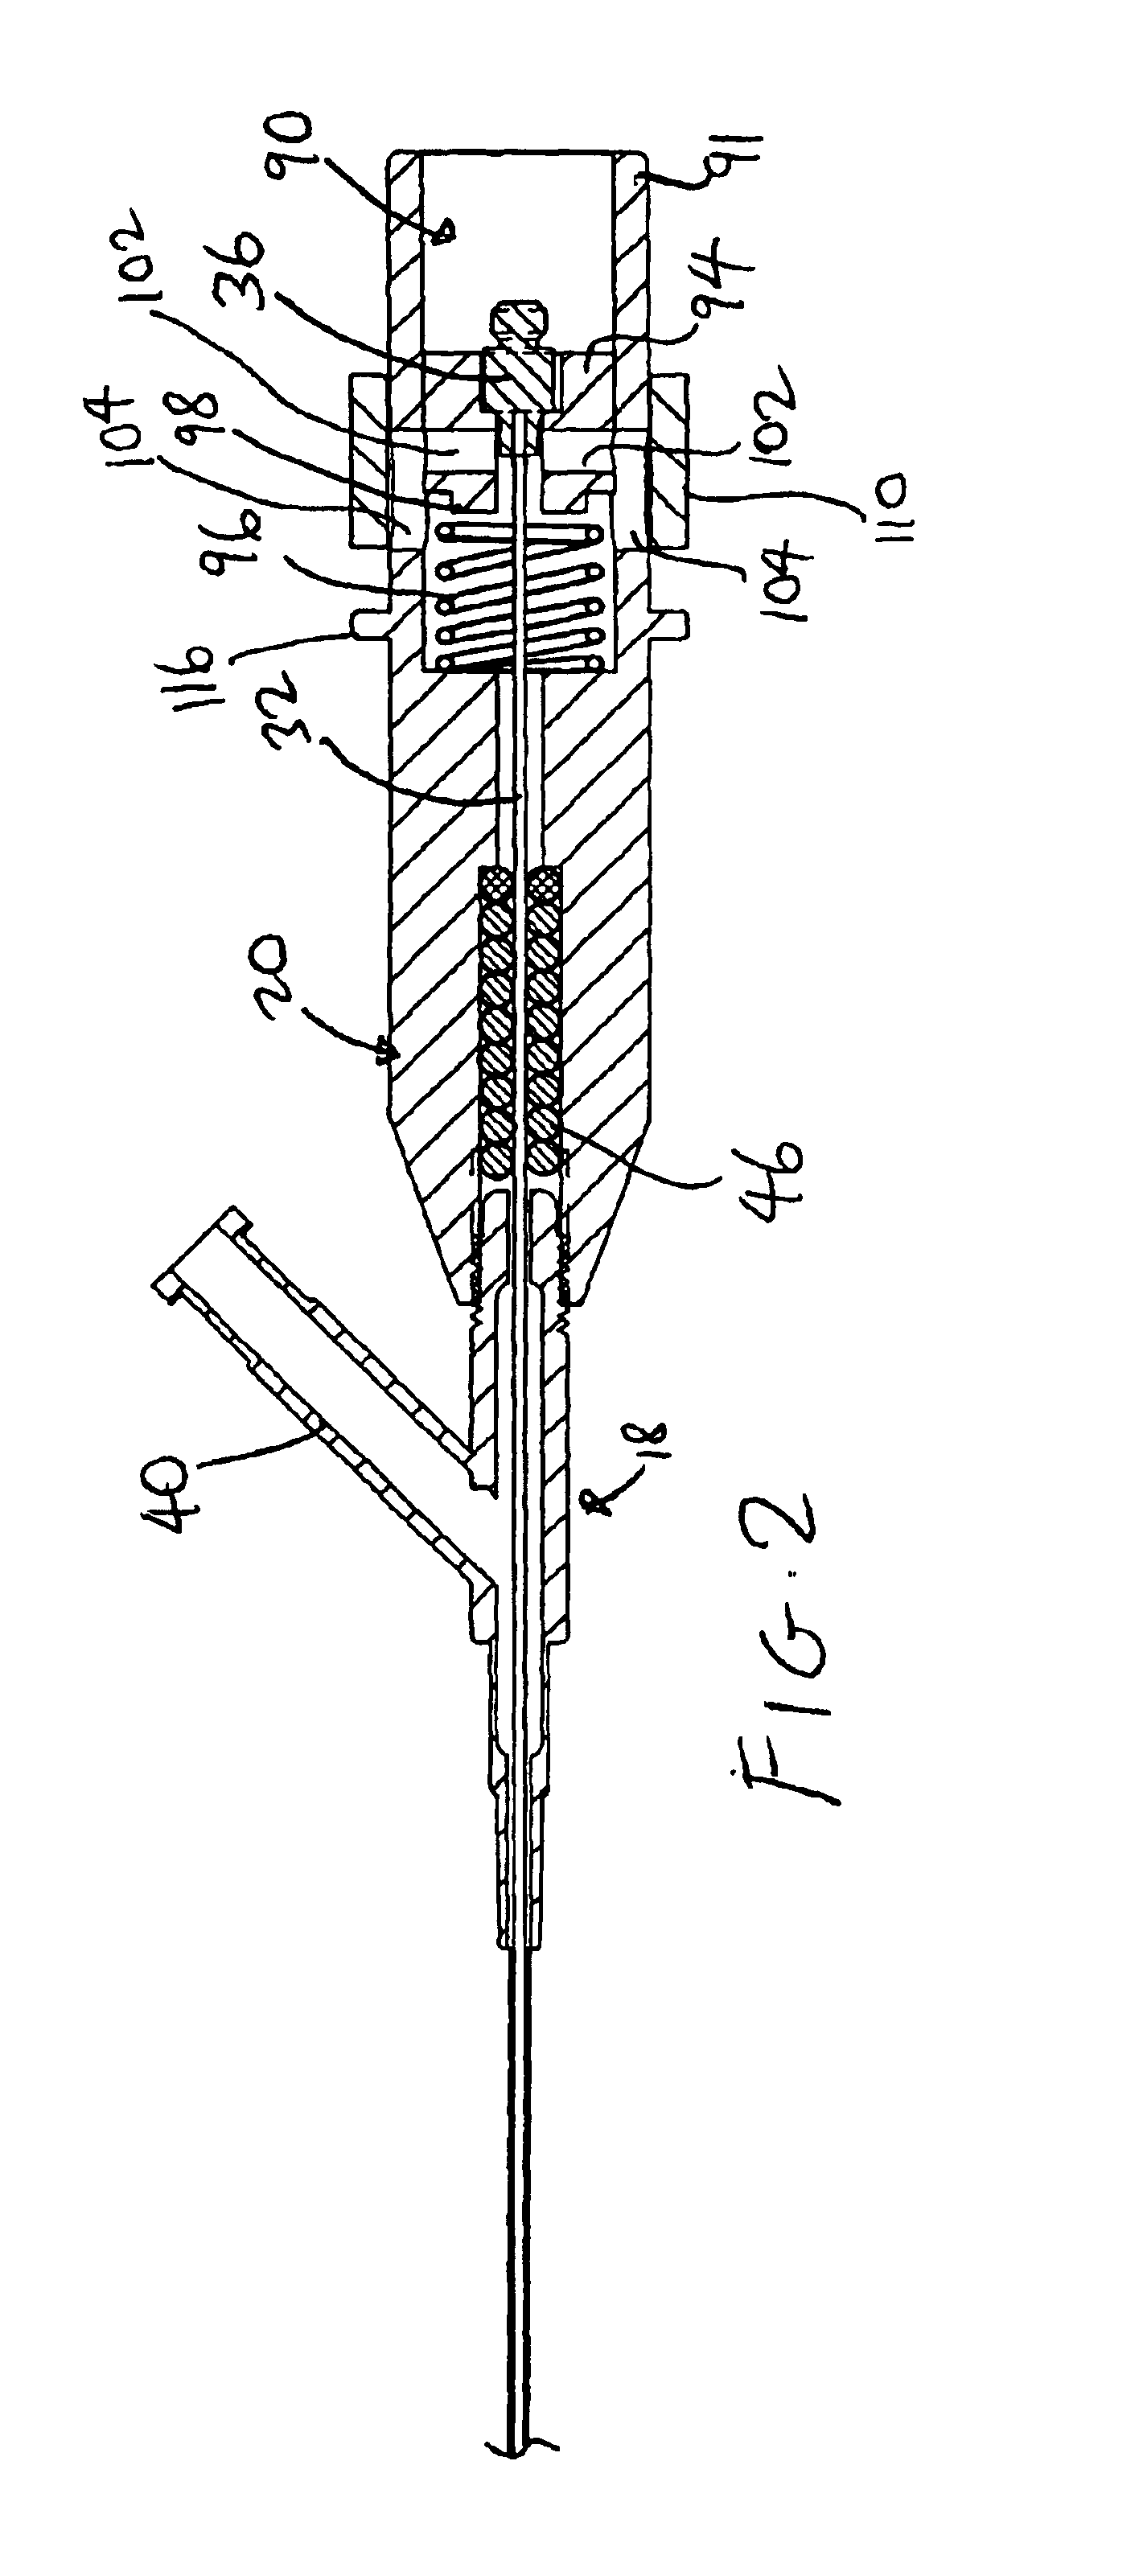 Connector for securing ultrasound catheter to transducer